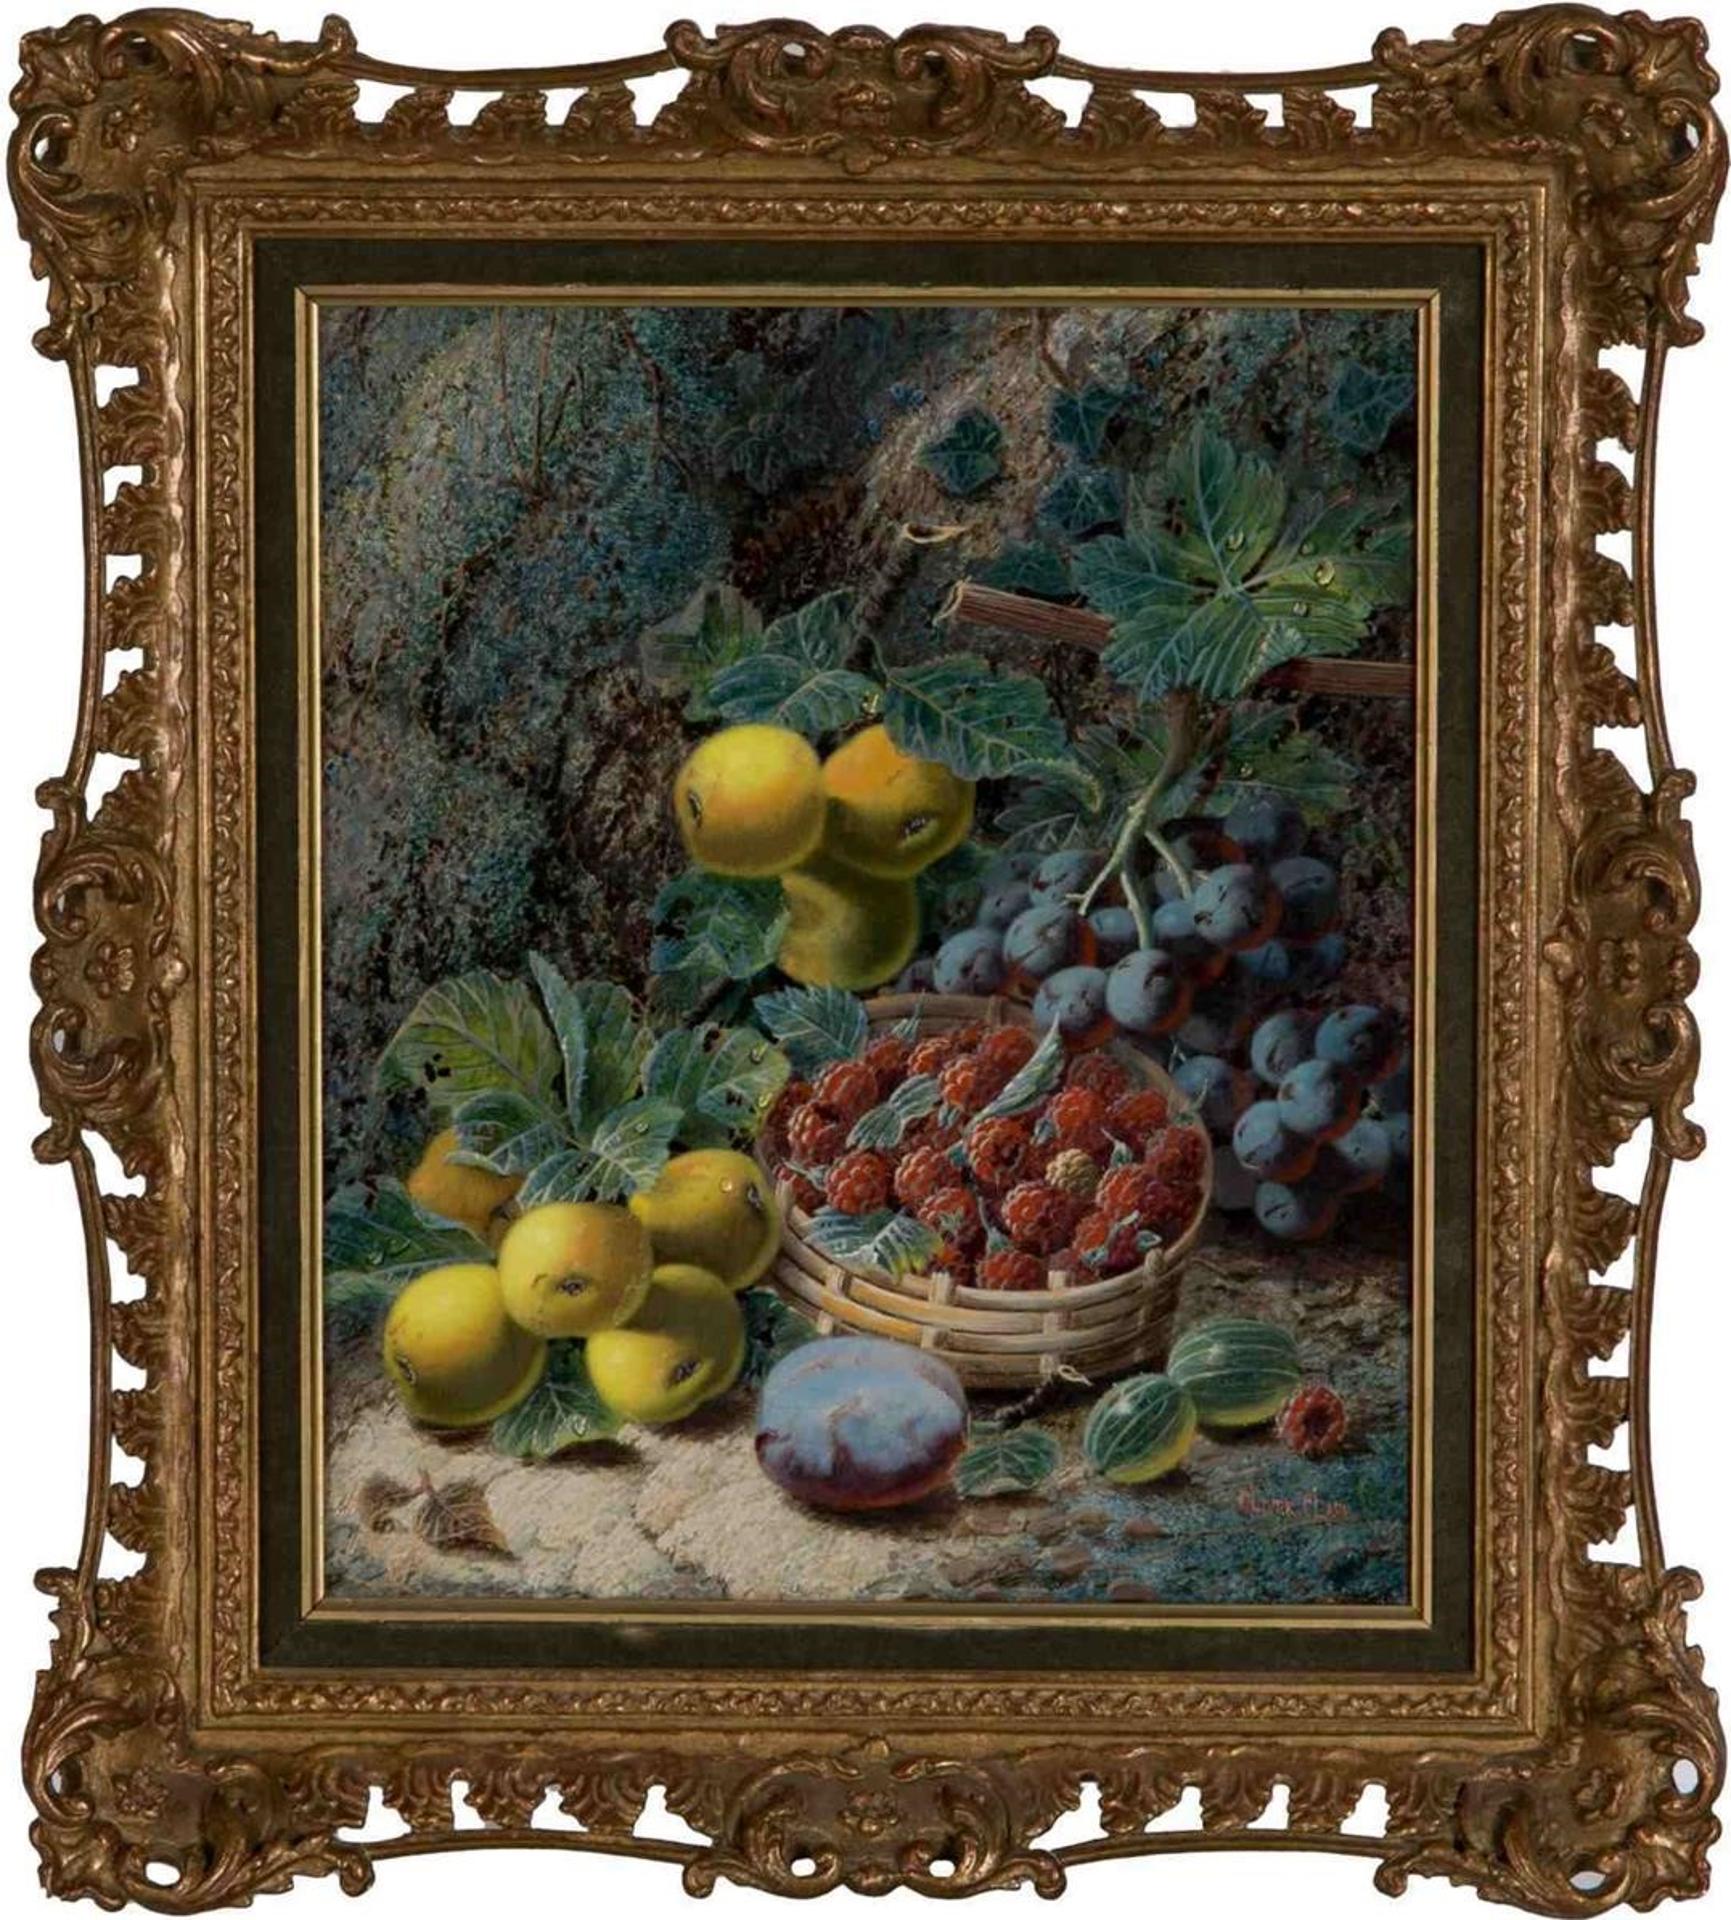 Oliver Clare (1853-1927) - Still Life with Fruit